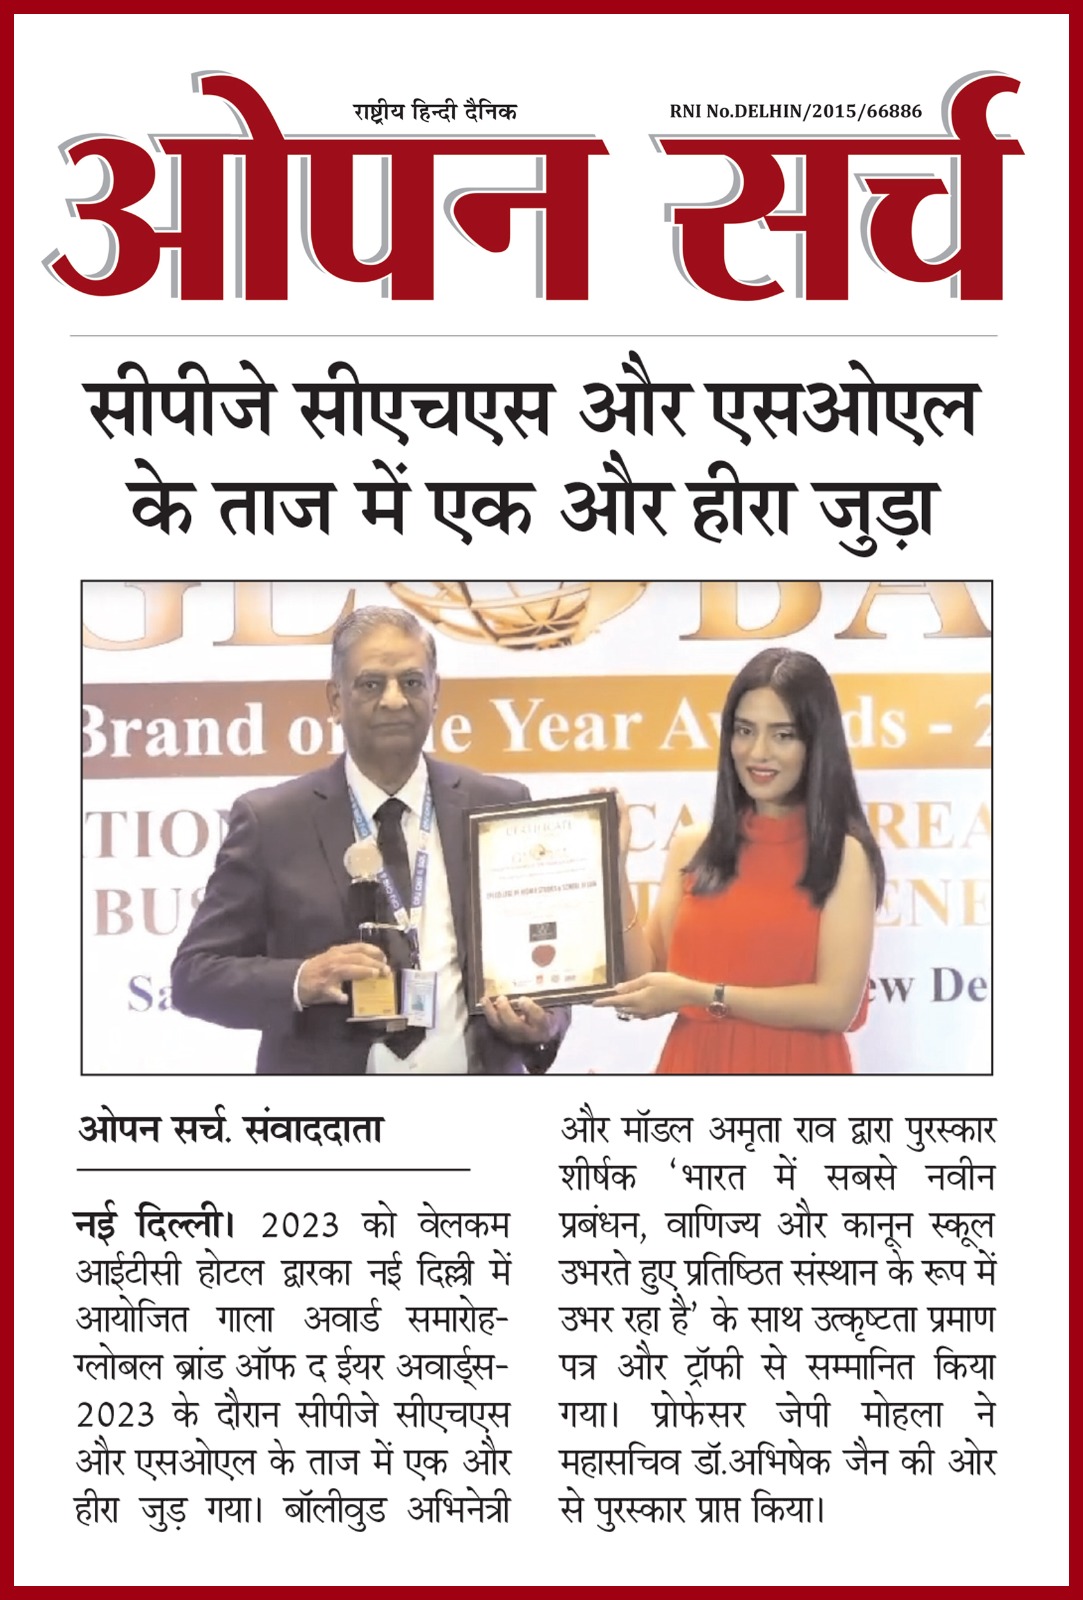 Press Release of MOST INNOVATIVE MANAGEMENT, COMMERCE & LAW SCHOOL EMERGING AS INSTITUTE OF EMINENCE IN INDIA” at the Global Brand of the Year Awards 2023